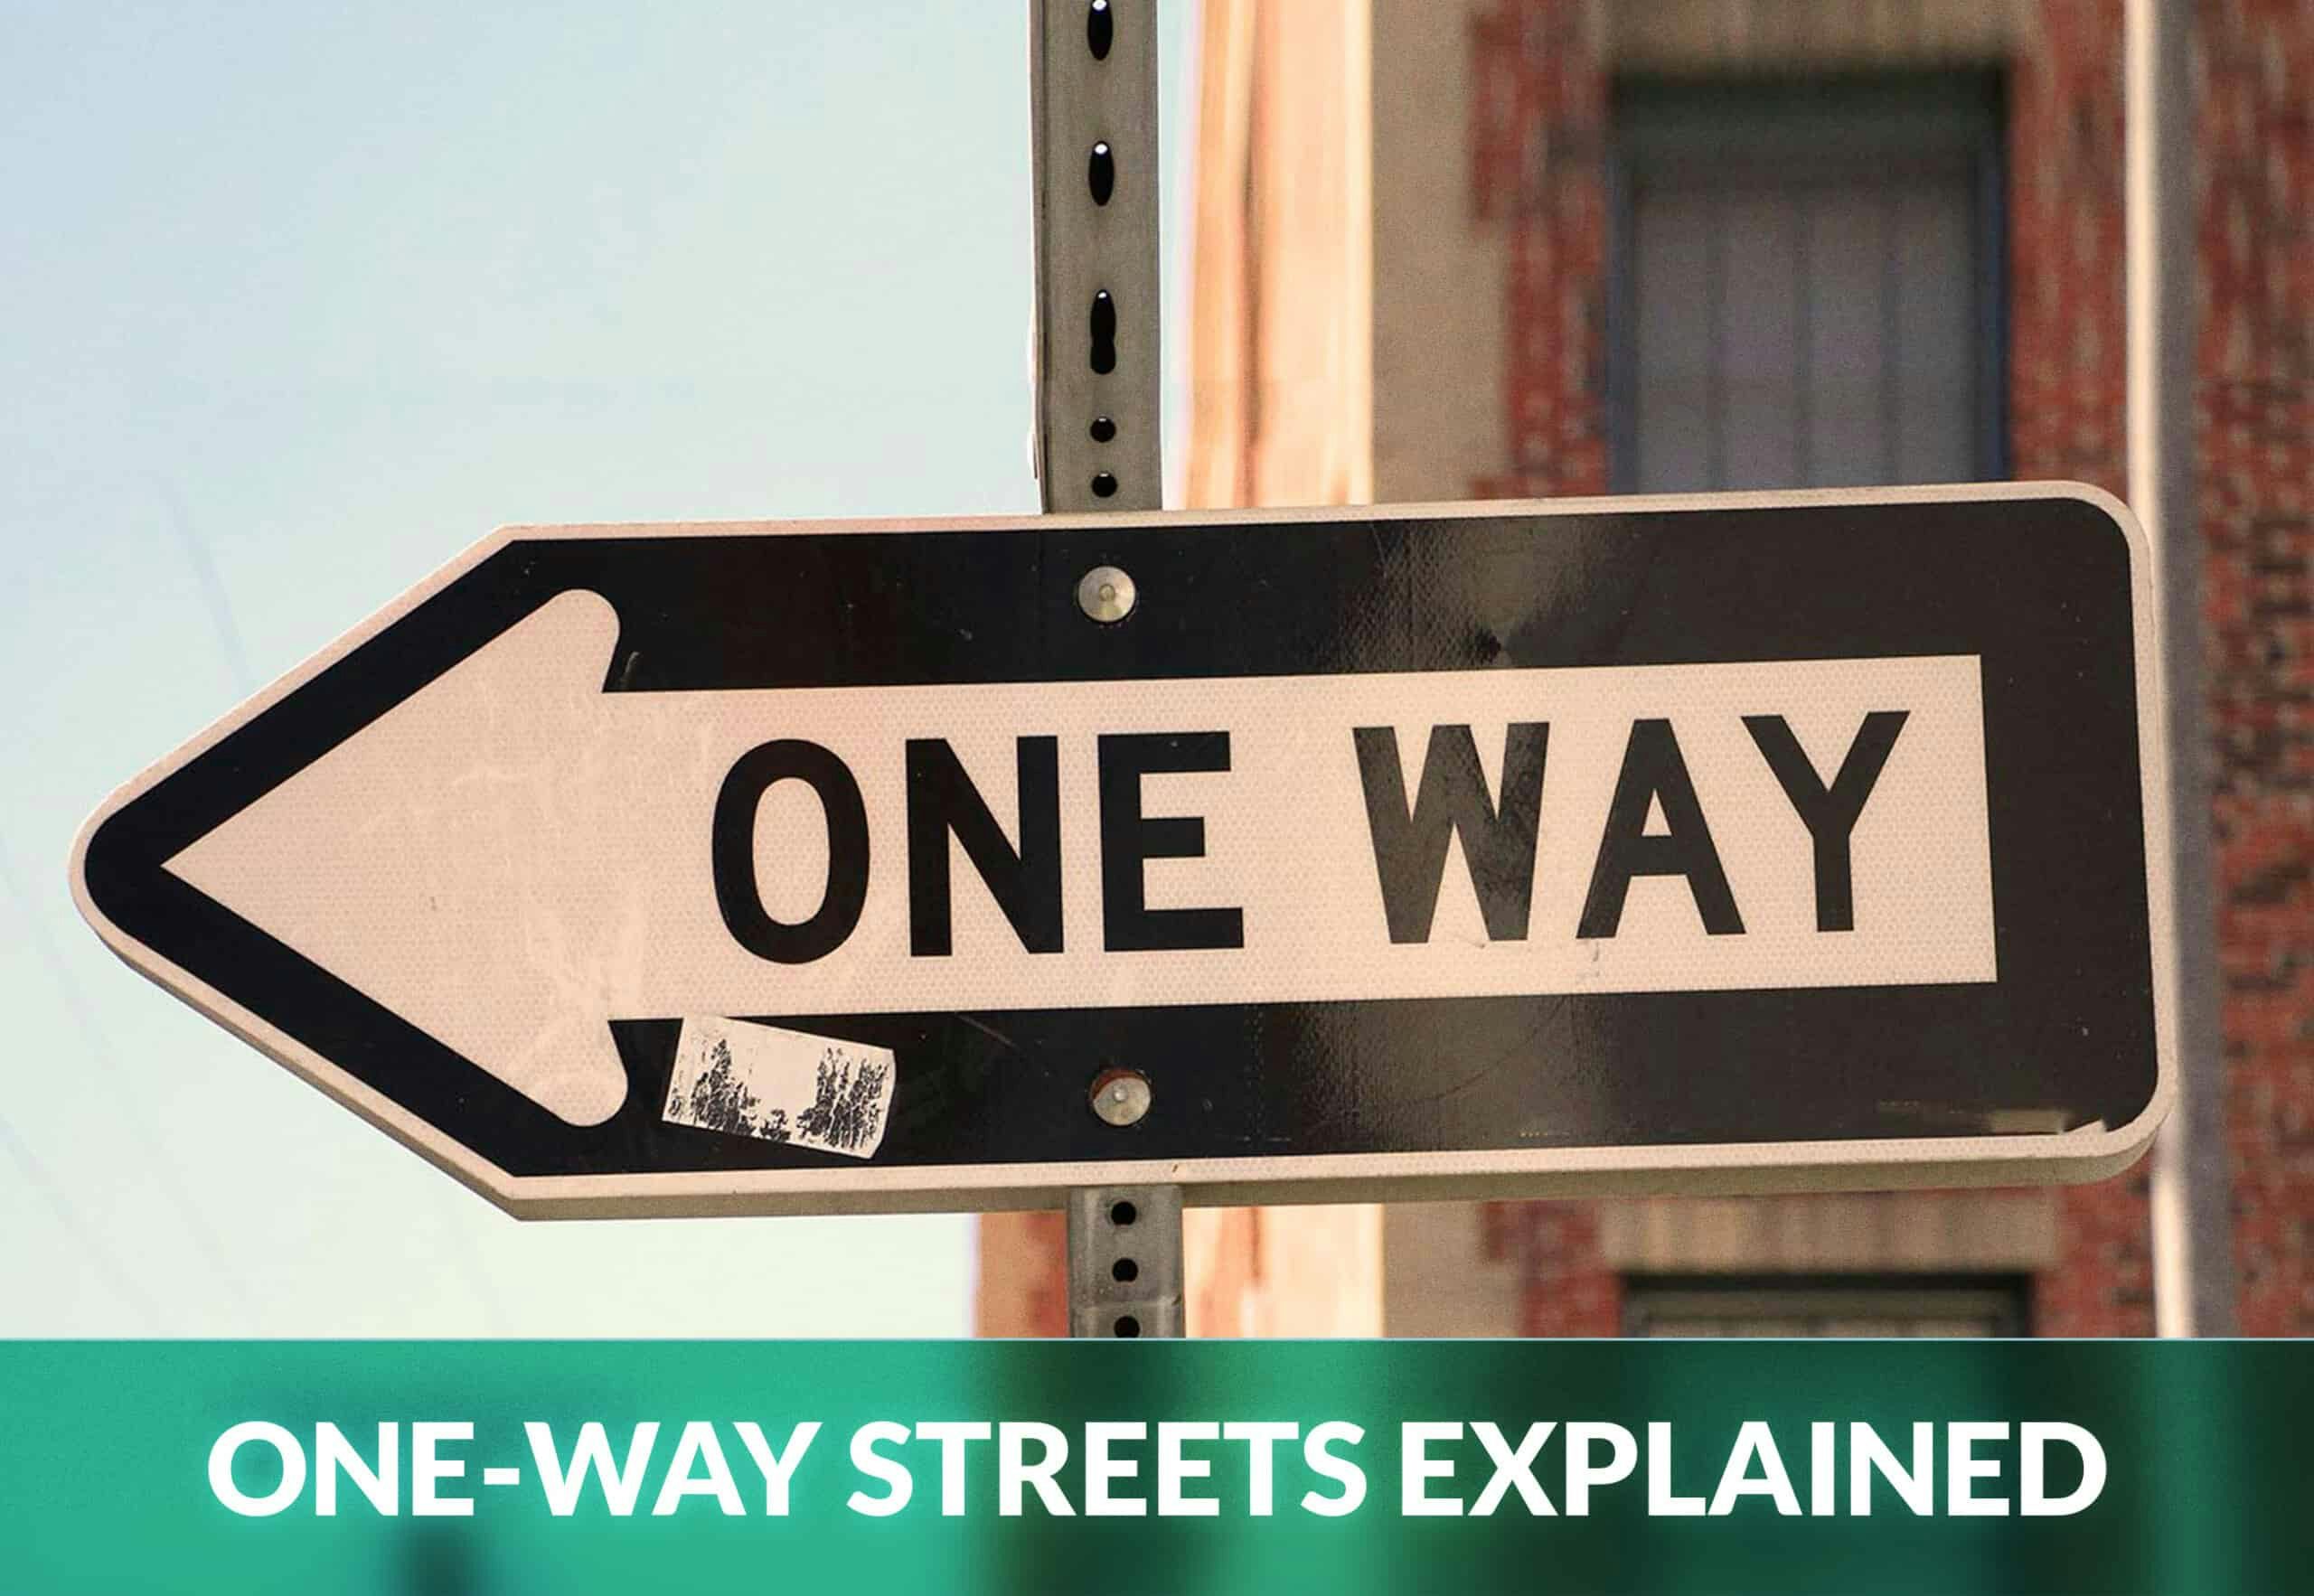 Are One-Way Streets Really That Bad?